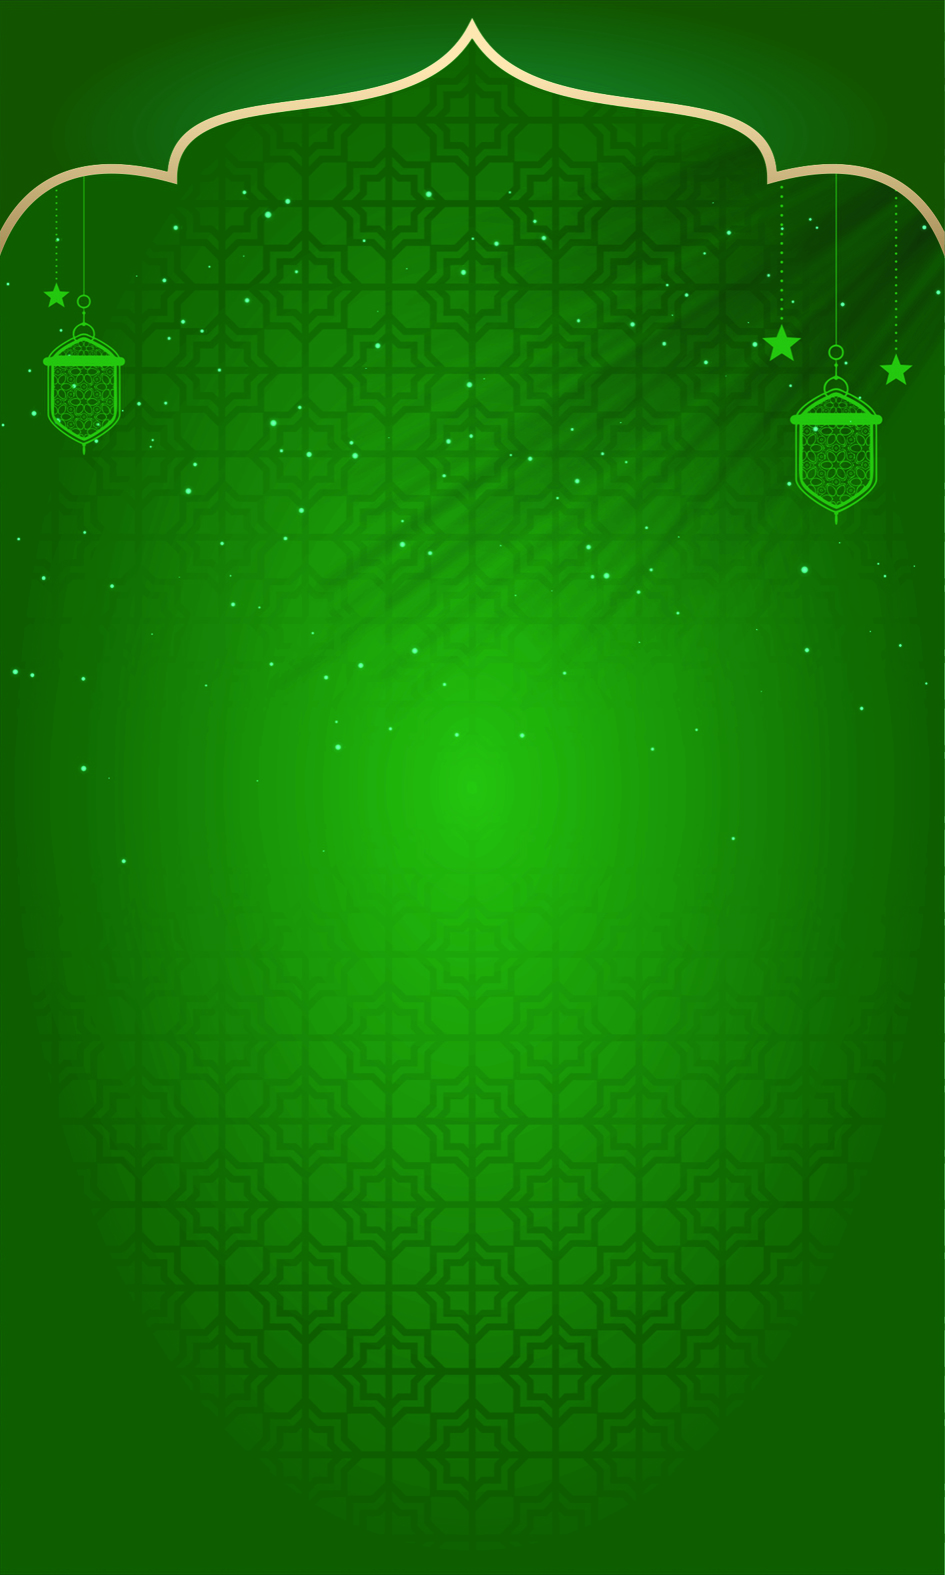 Deep Green Eid Background free - FREE Vector Design - Cdr, Ai, EPS, PNG, SVG